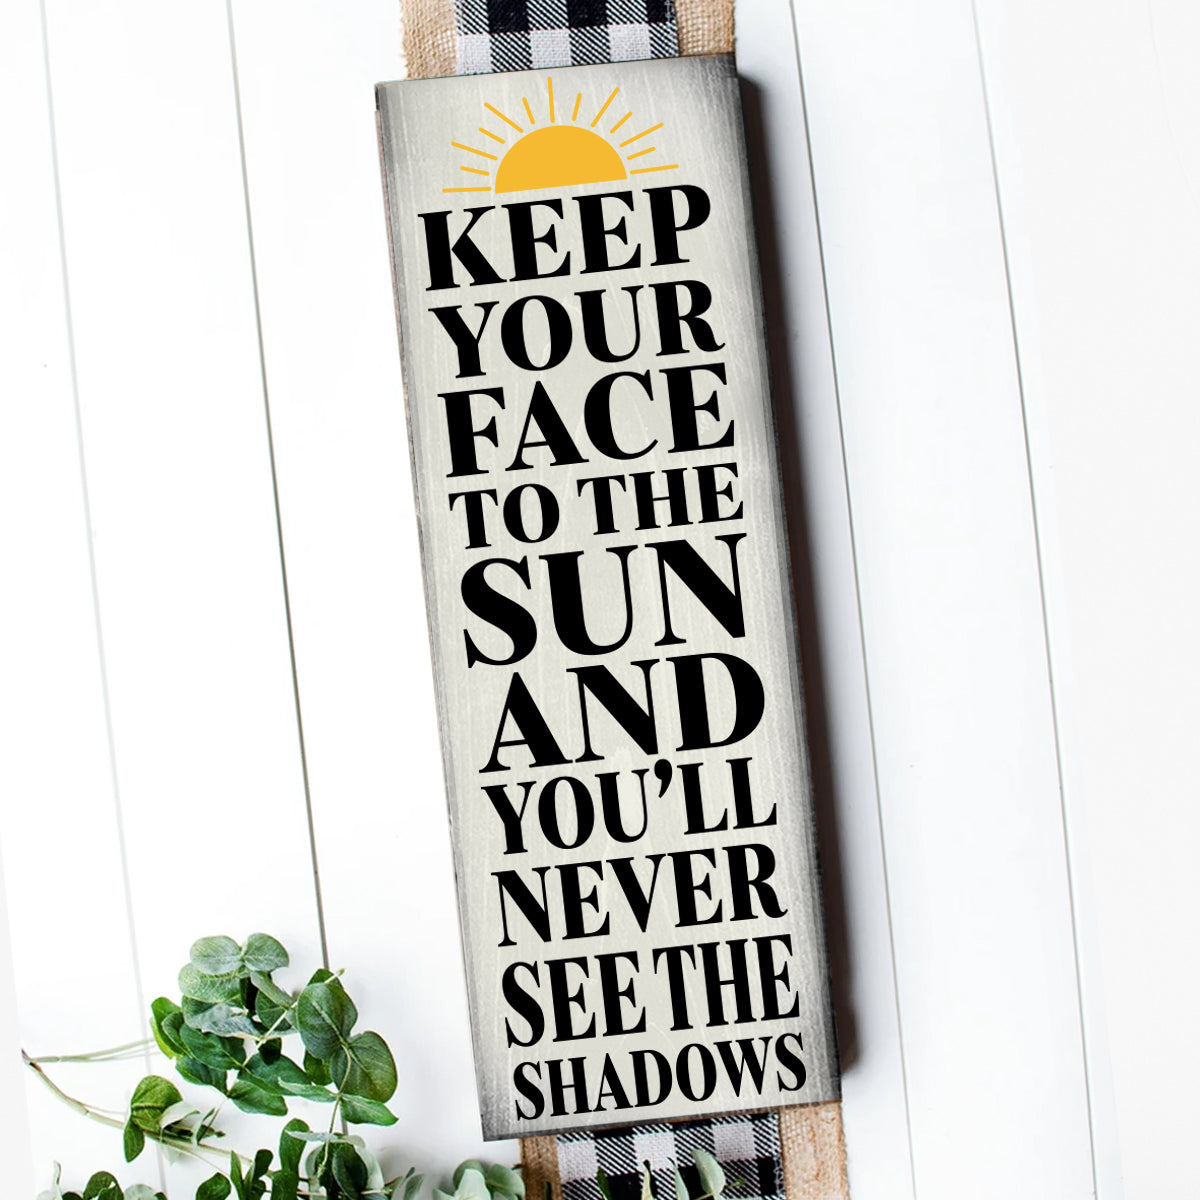 KEEP YOUR FACE TO THE SUN -RBC CHILDREN'S HOSPITAL